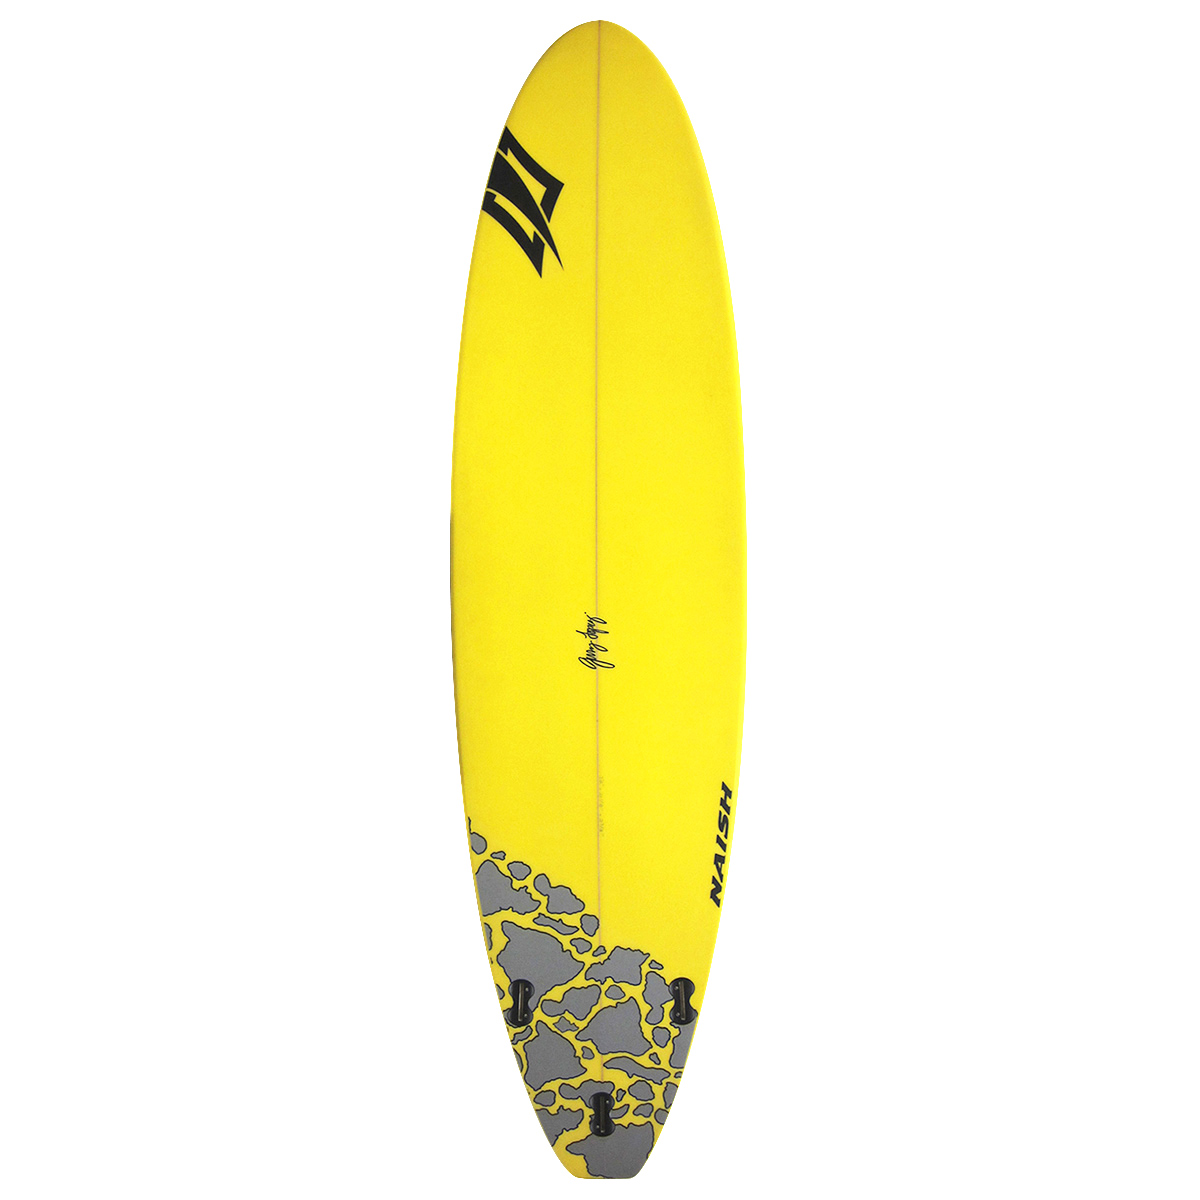 NAISH x Gerry Lopez / FUN 7`4 Designed by Gerry Lopez